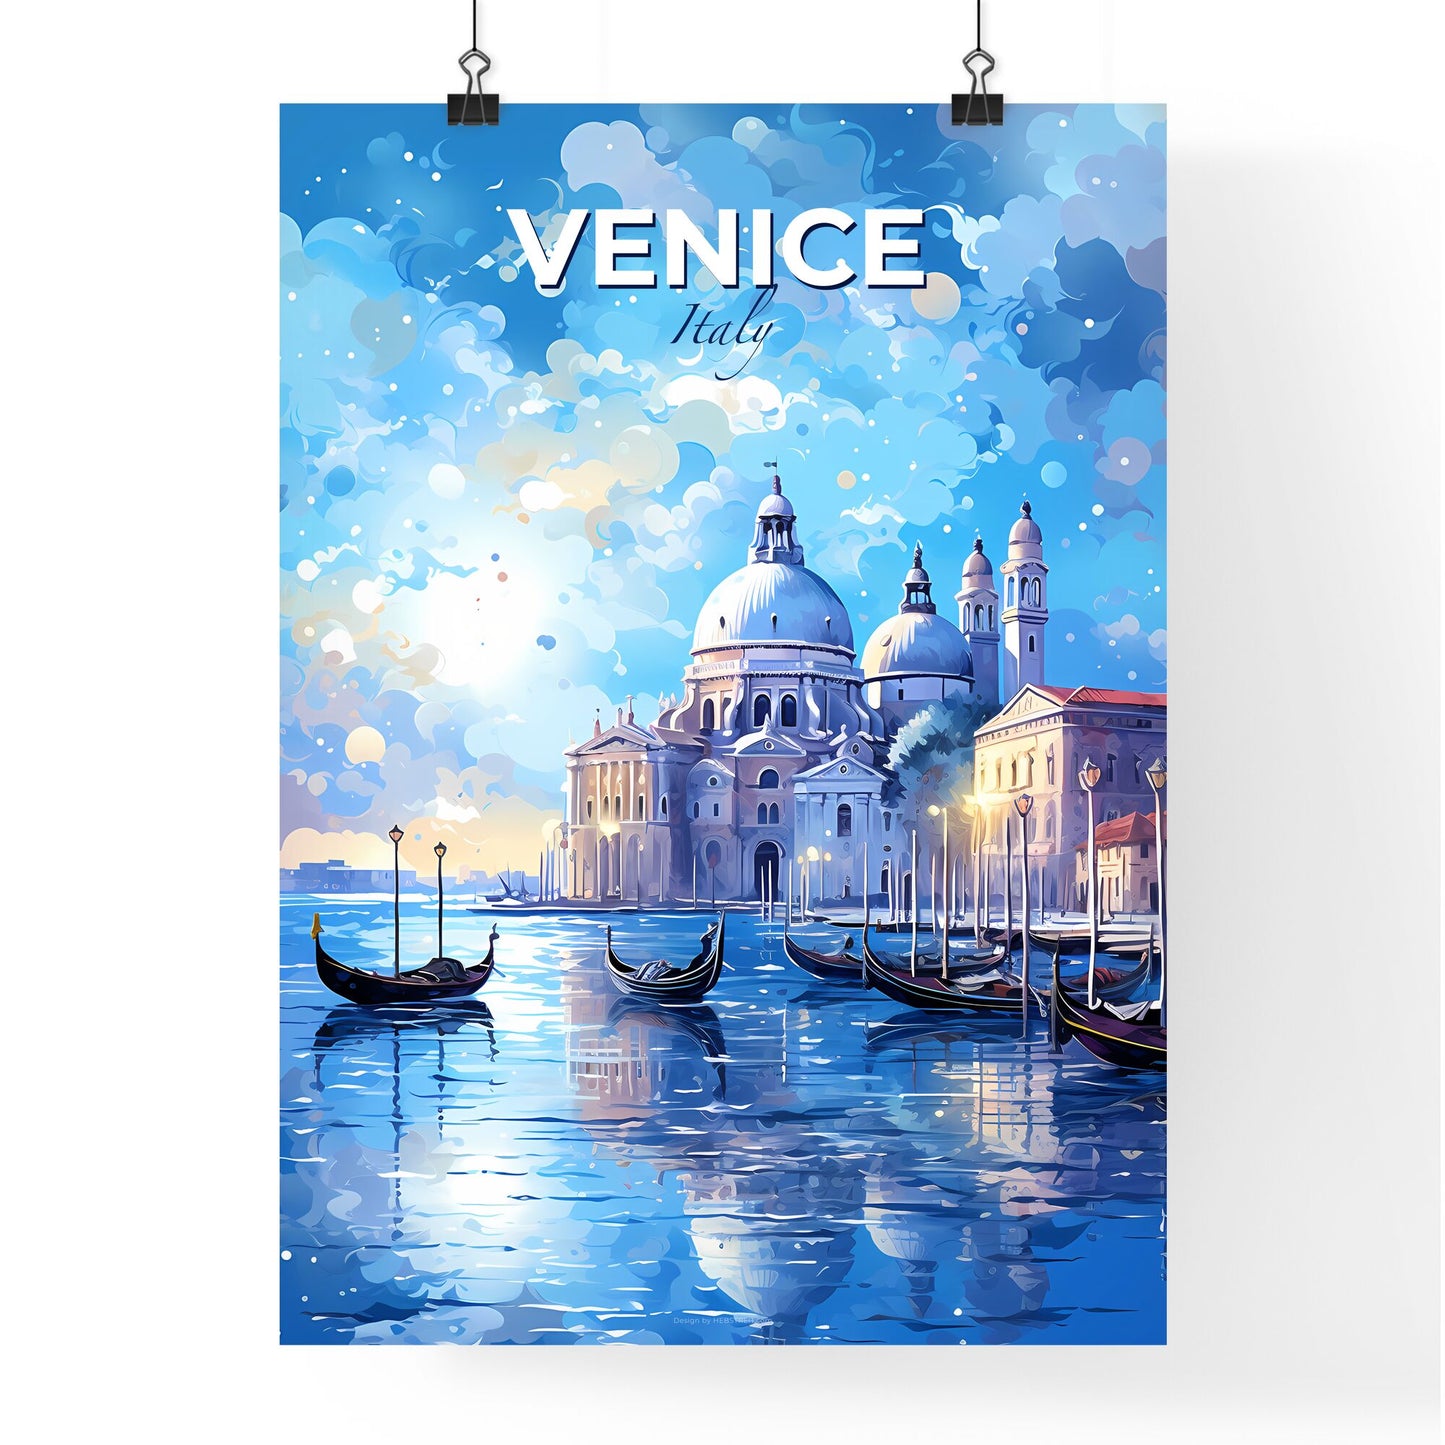 Venice Italy Skyline - A Water With Boats And A Building In The Background - Customizable Travel Gift Default Title